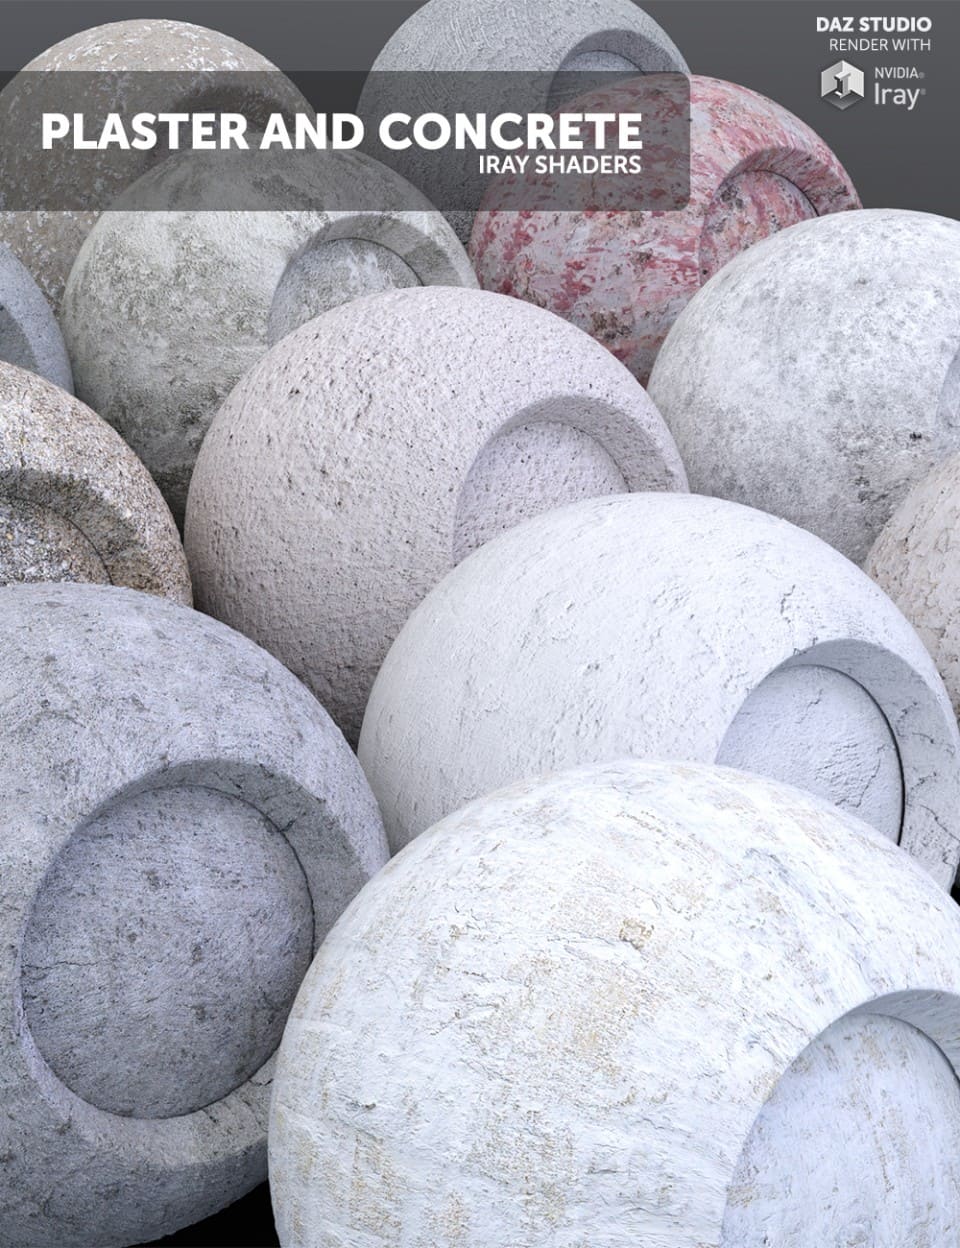 Plaster and Concrete - Iray Shaders_DAZ3DDL